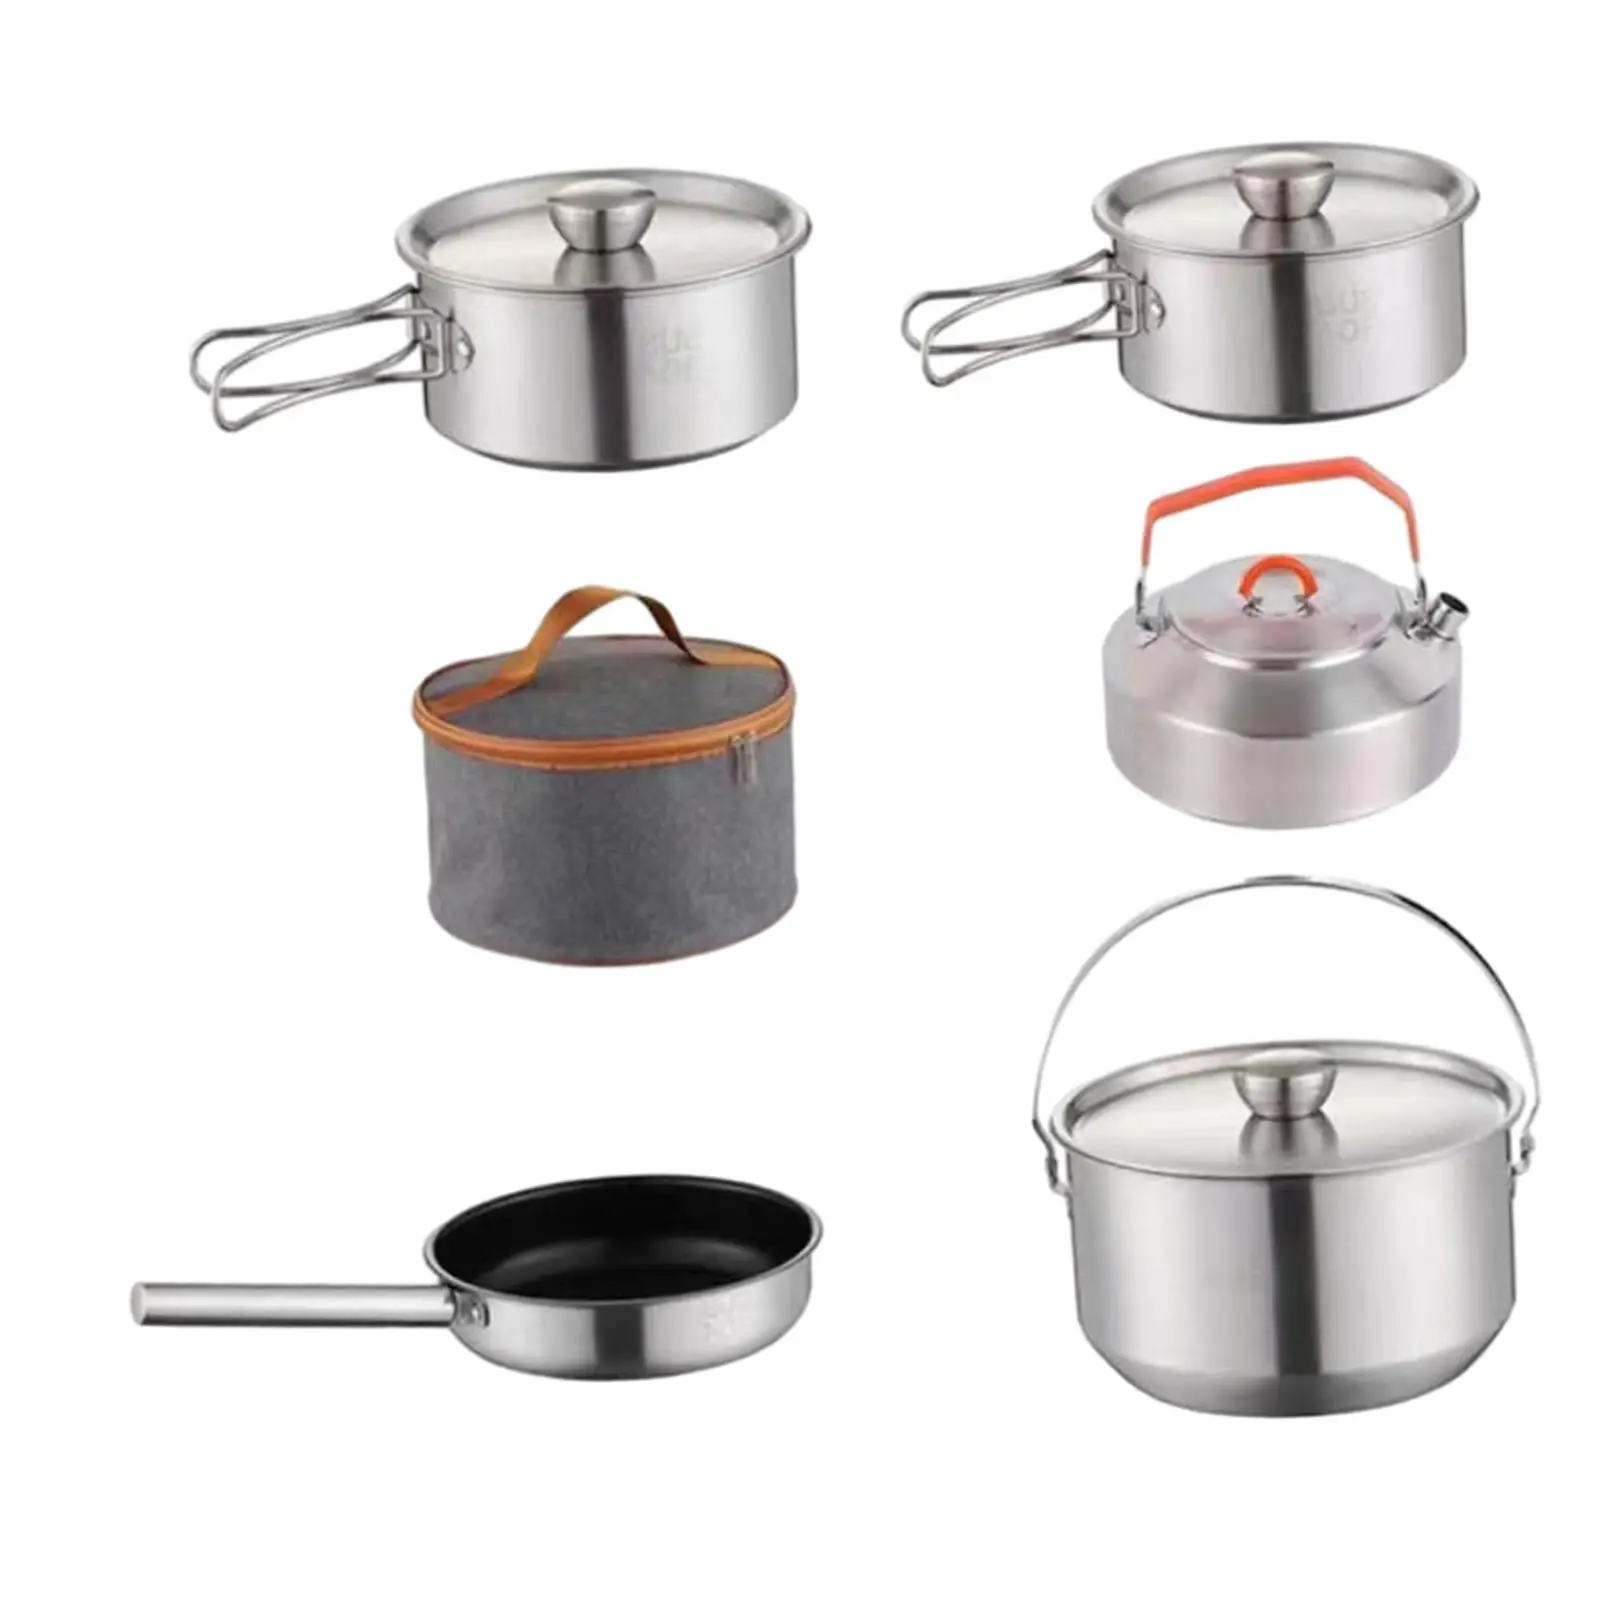 Camping Cookware Kit Outdoor Pot Stainless Steel Lightweight Cooking Set Cookset for Dinner Kitchen Travel Family Backpacking